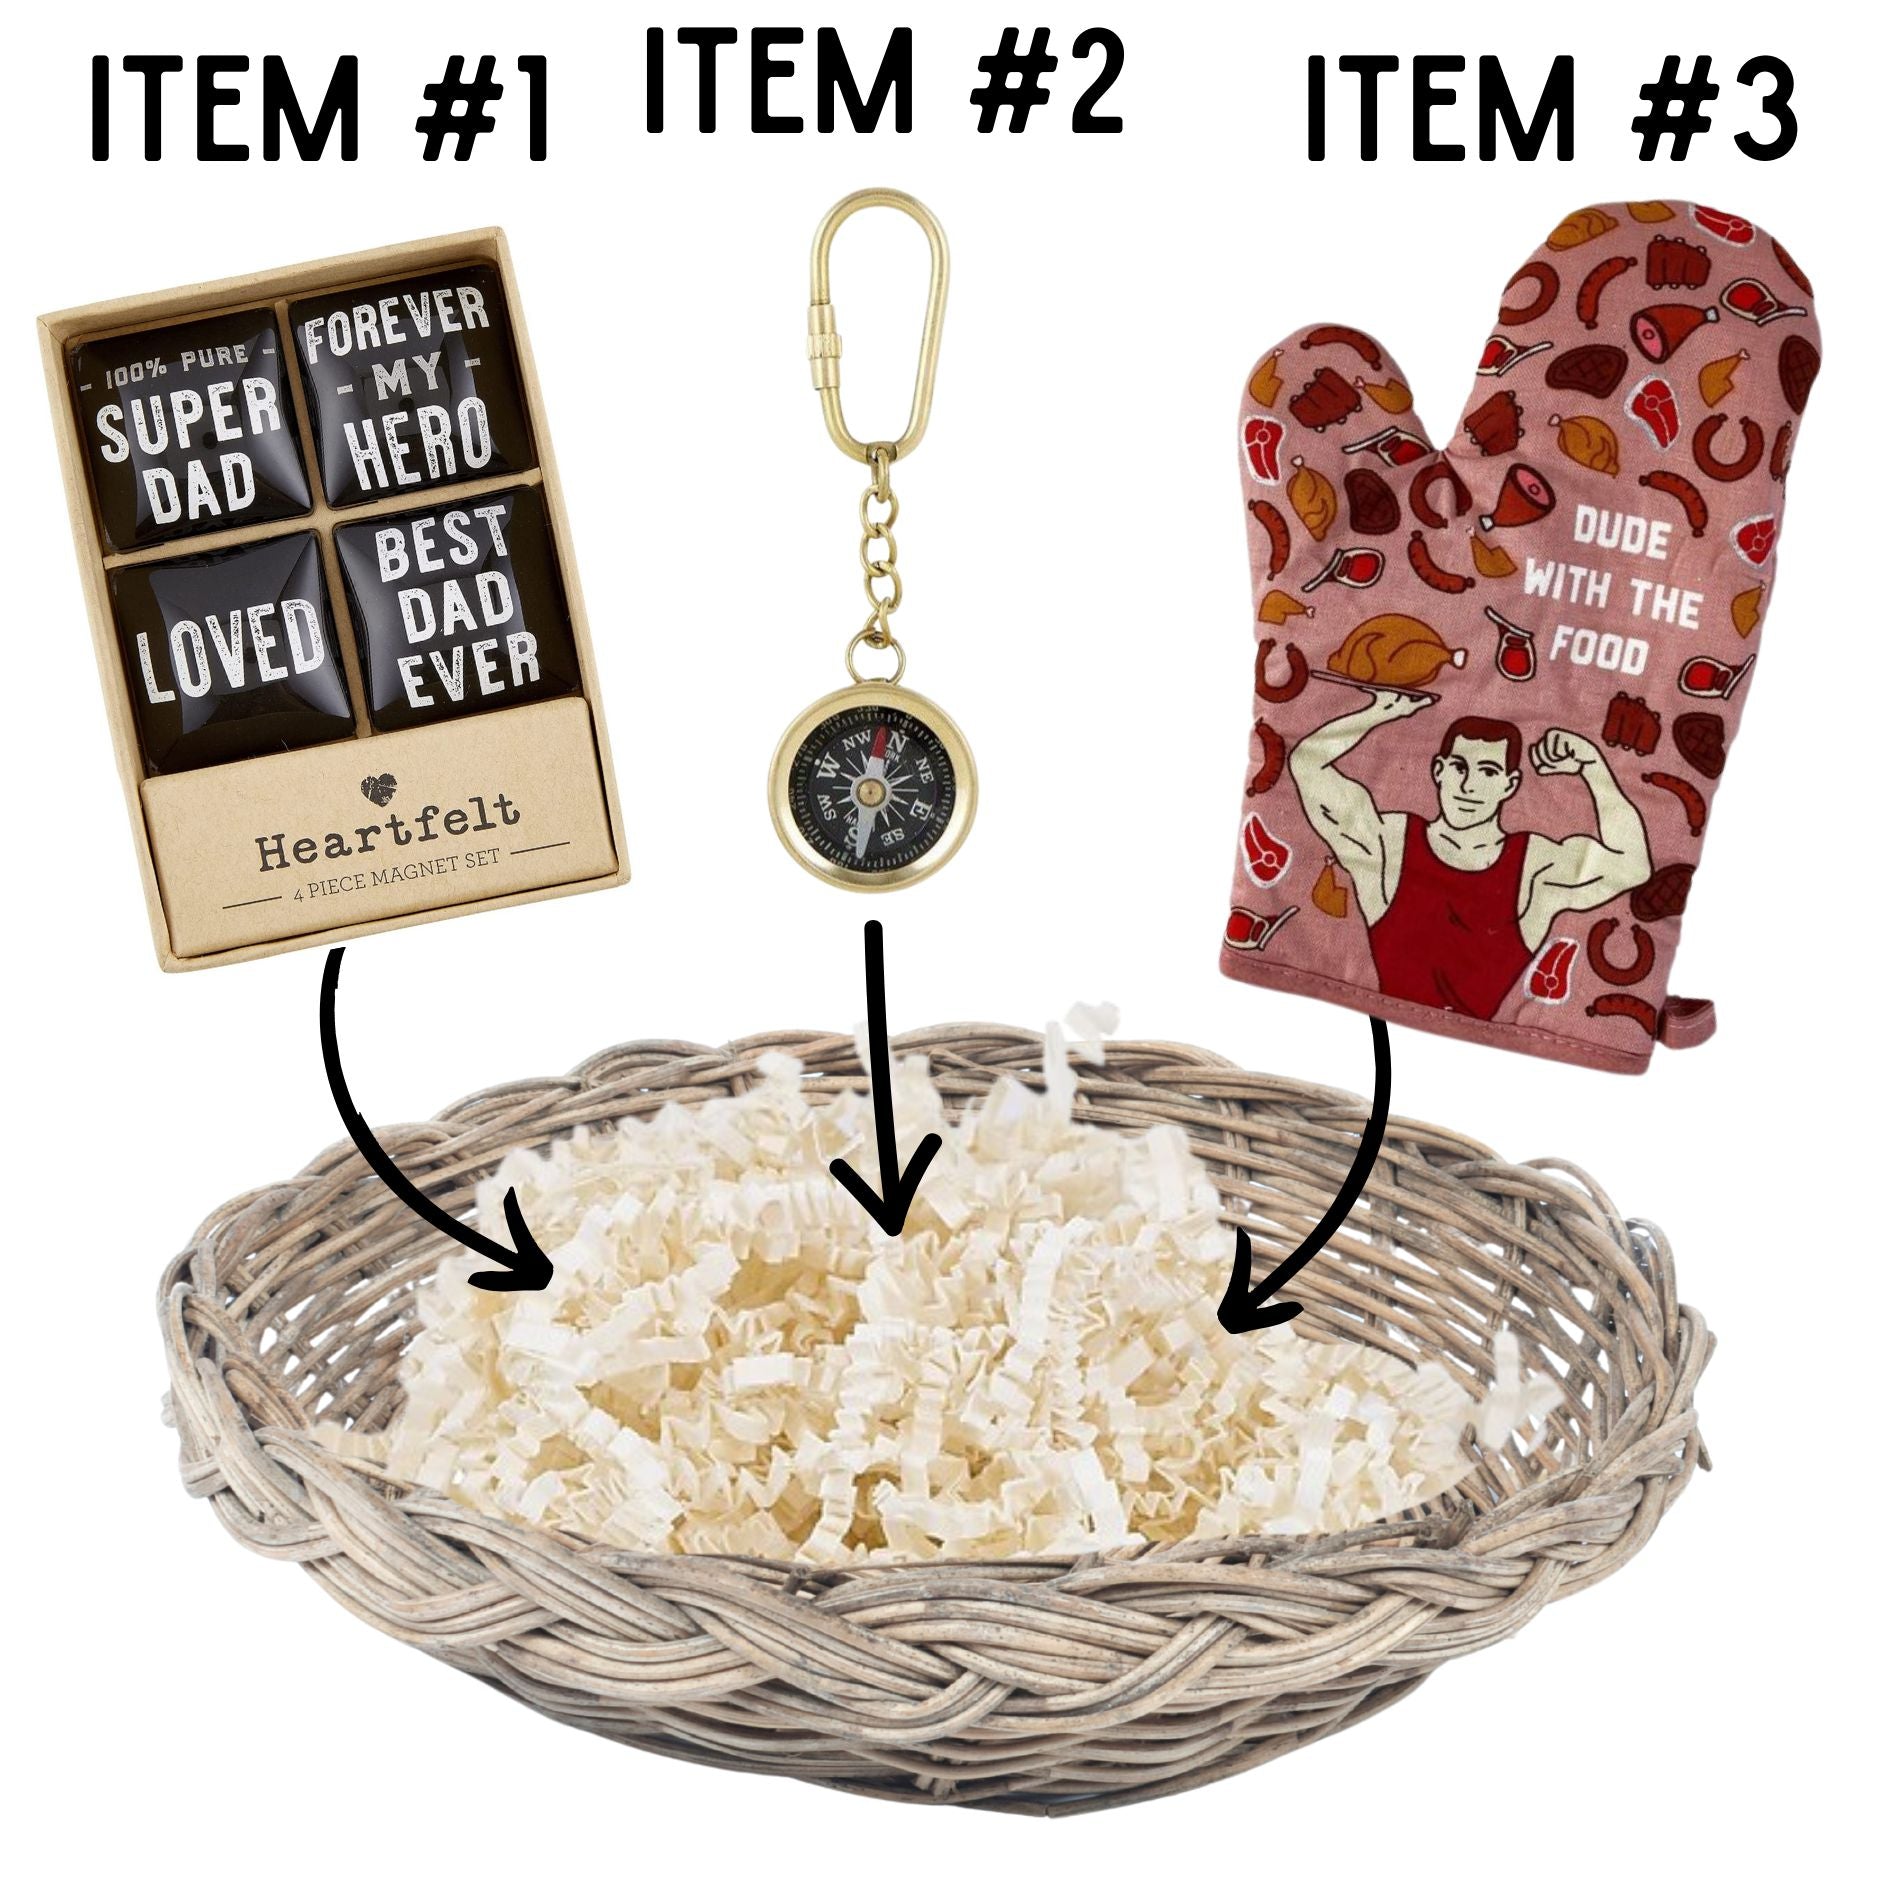 Super Dad Magnets Father's Day Gift Basket | 3 Gift Items in a Reusable Basket